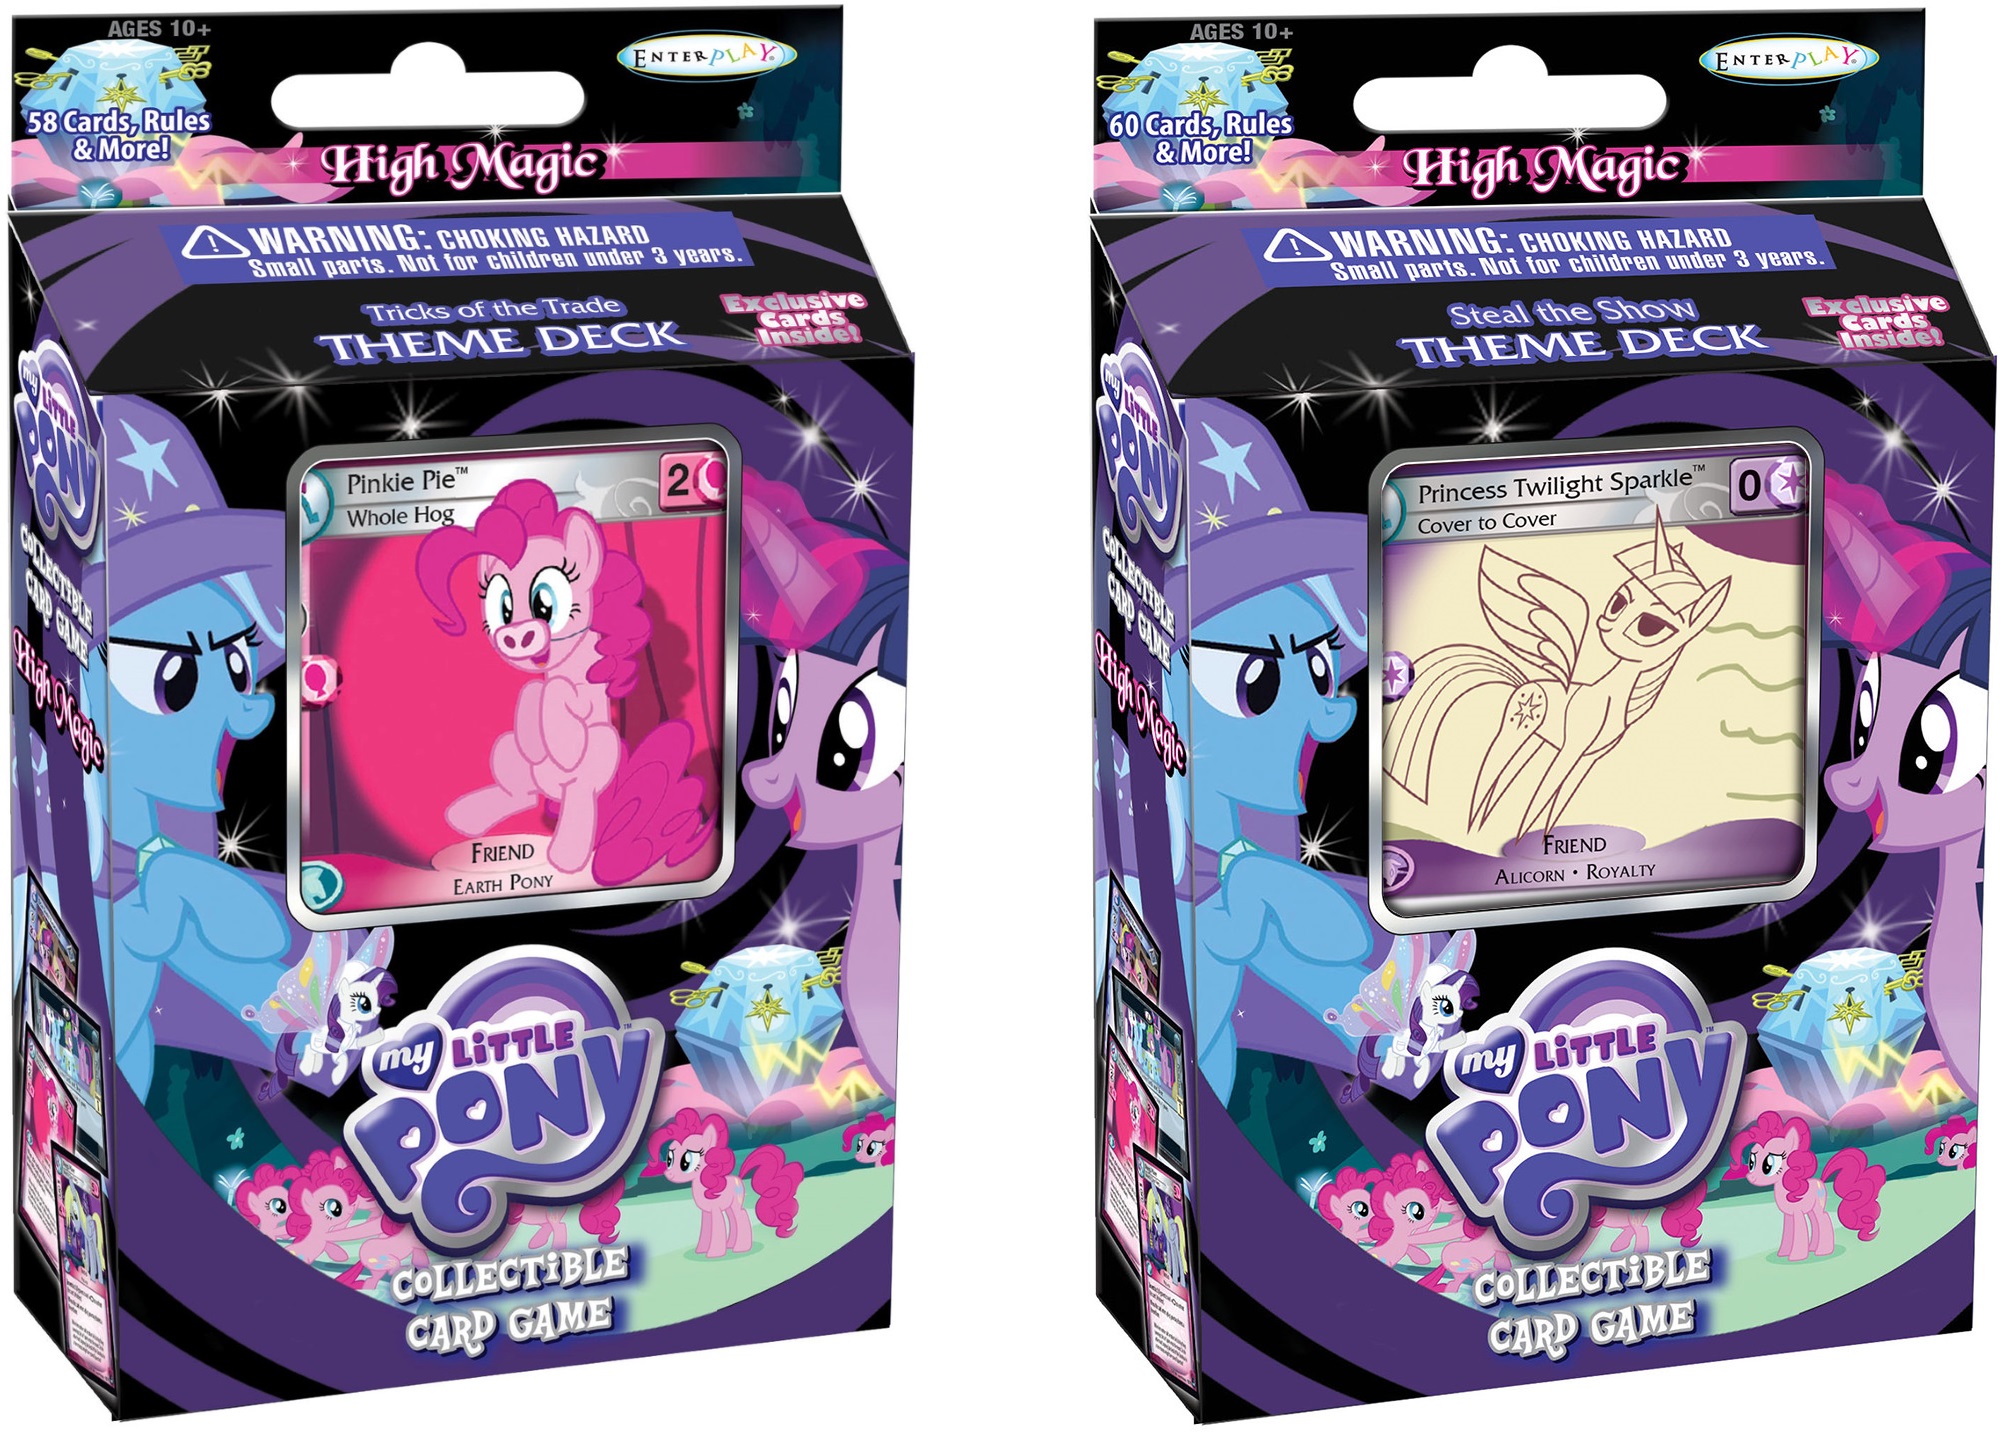 My Little Pony CCG Crystal Games Theme Deck Special Delivery A2 for sale online 